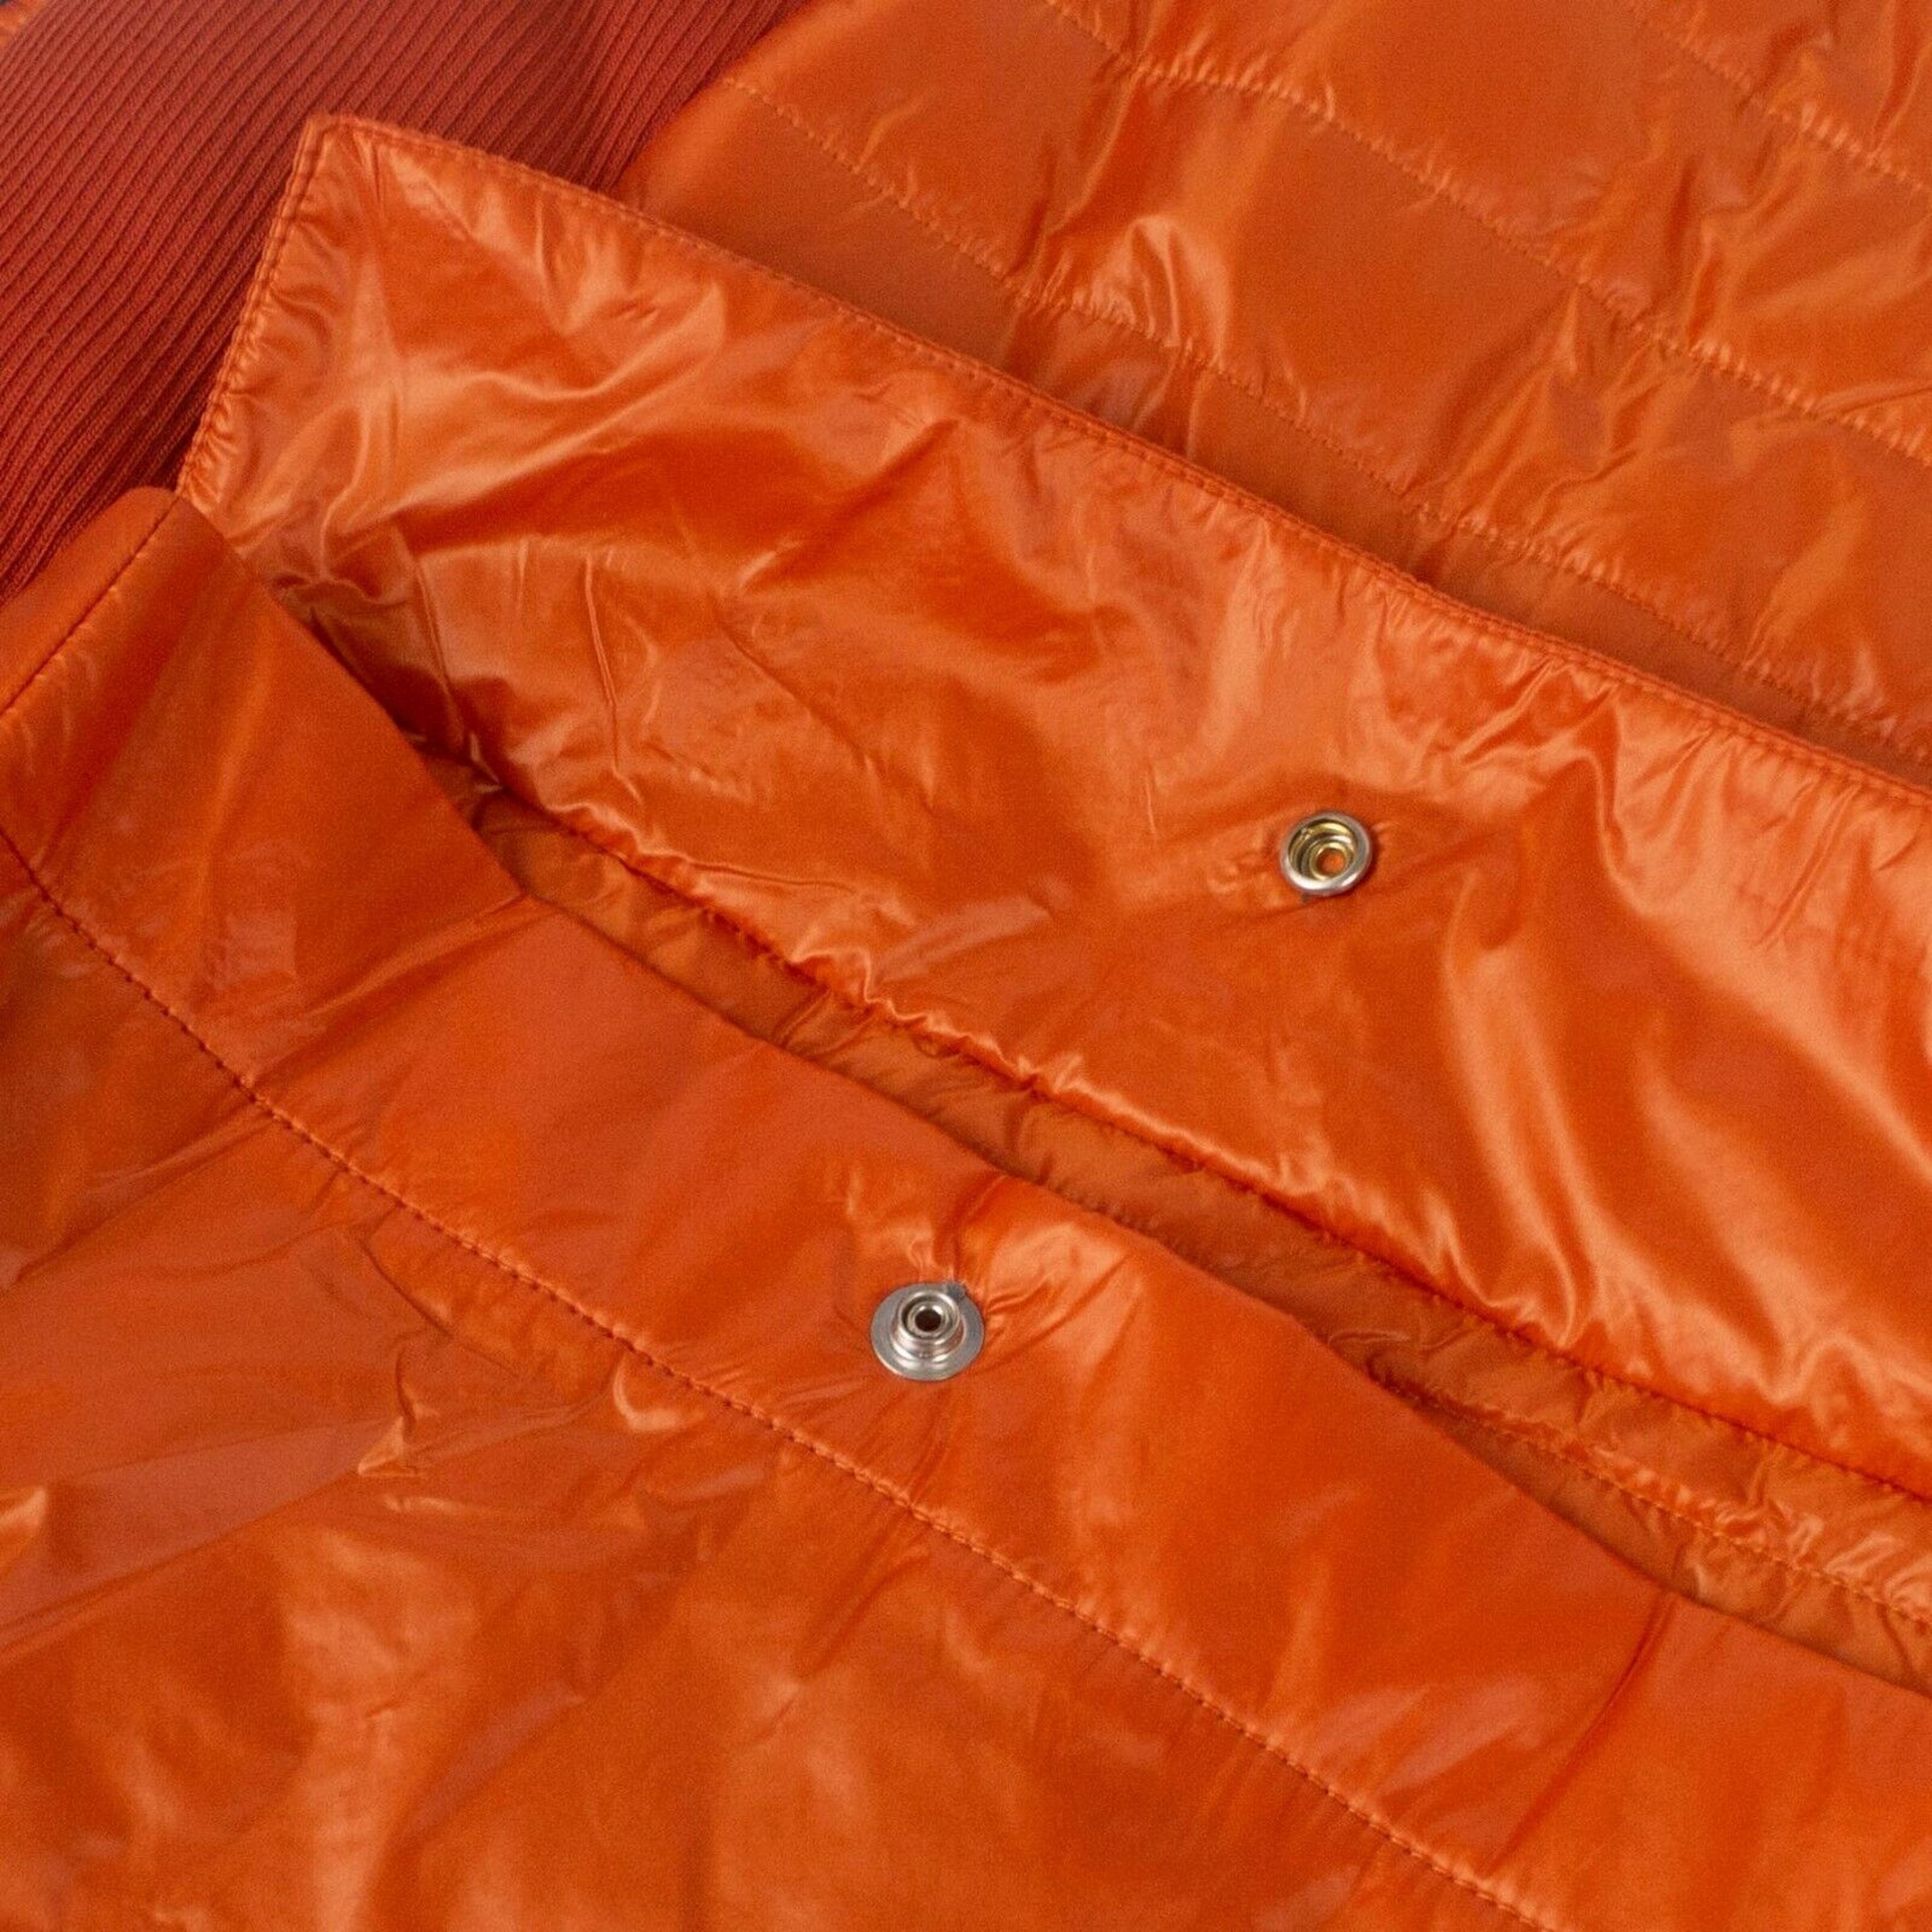 Alternate View 5 of A-COLD-WALL* Men's Puffer Panelled Jacket Vest - Orange